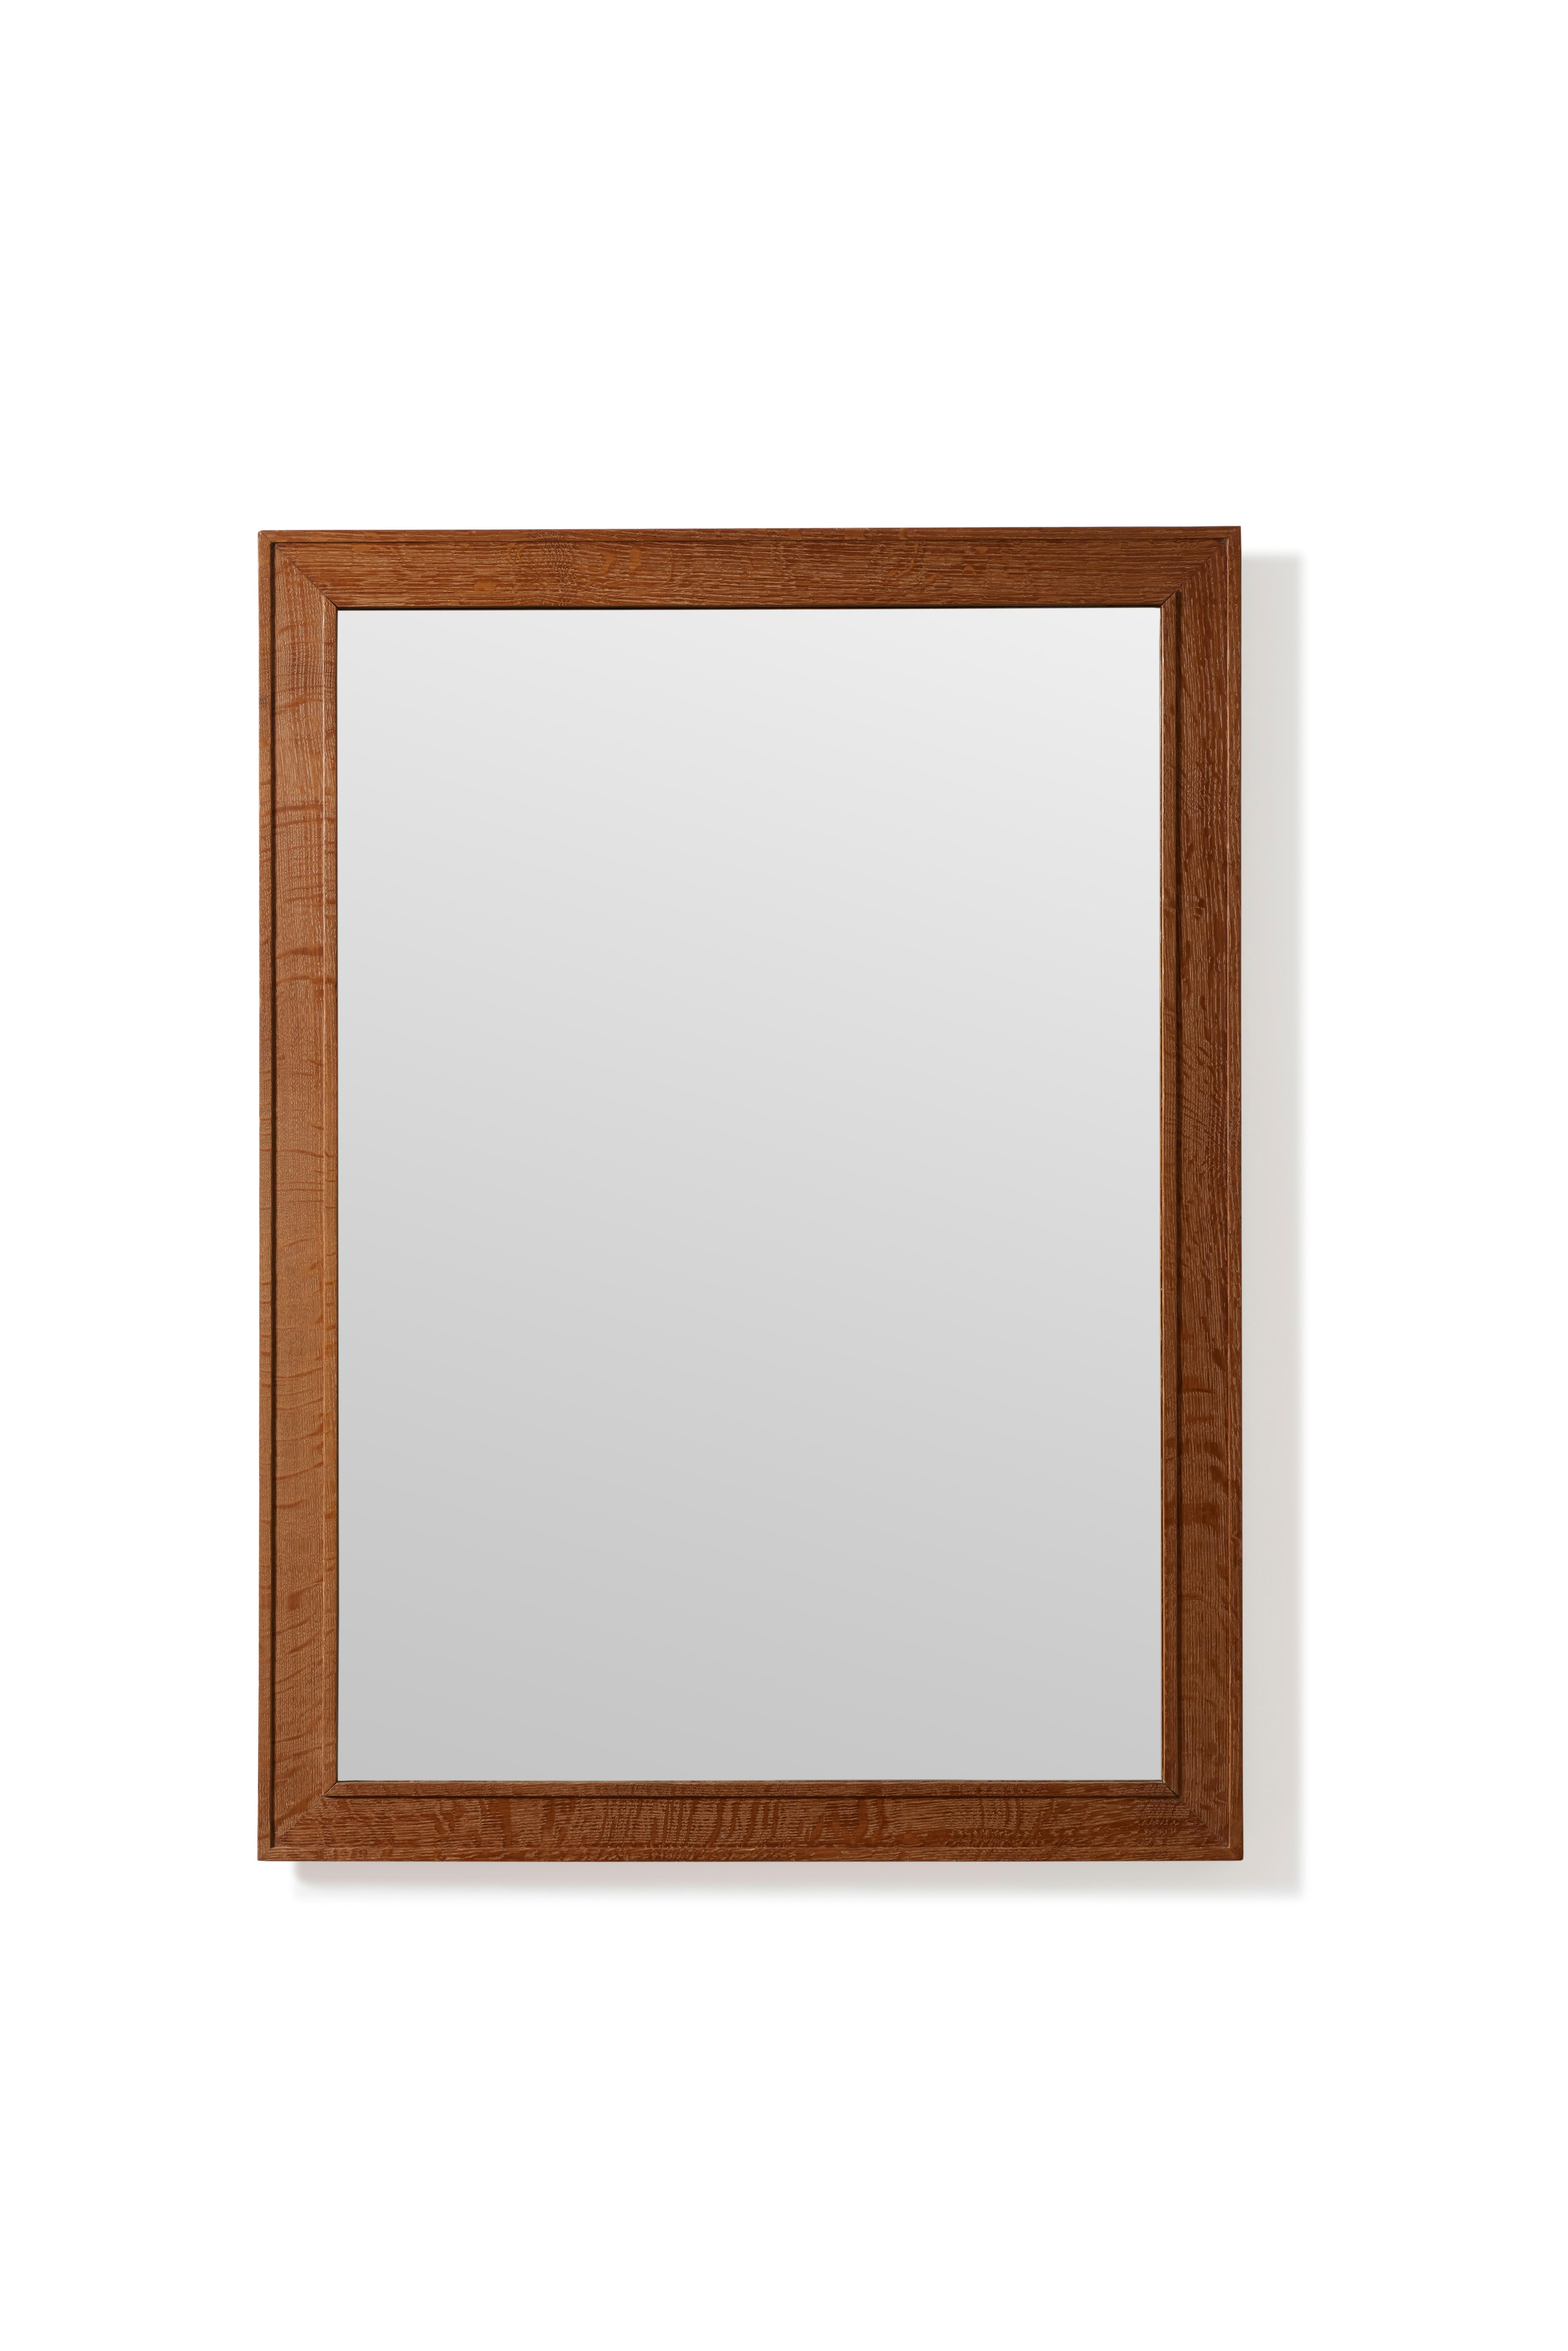 Rectangular mirror with molded oak frame. 
The mirror is dated on the reverse : 6.11.39
Numbered and labeled in the name of Marcel Raval. 
A certificate of the Jean-Michel Frank committee will be given to the buyer.